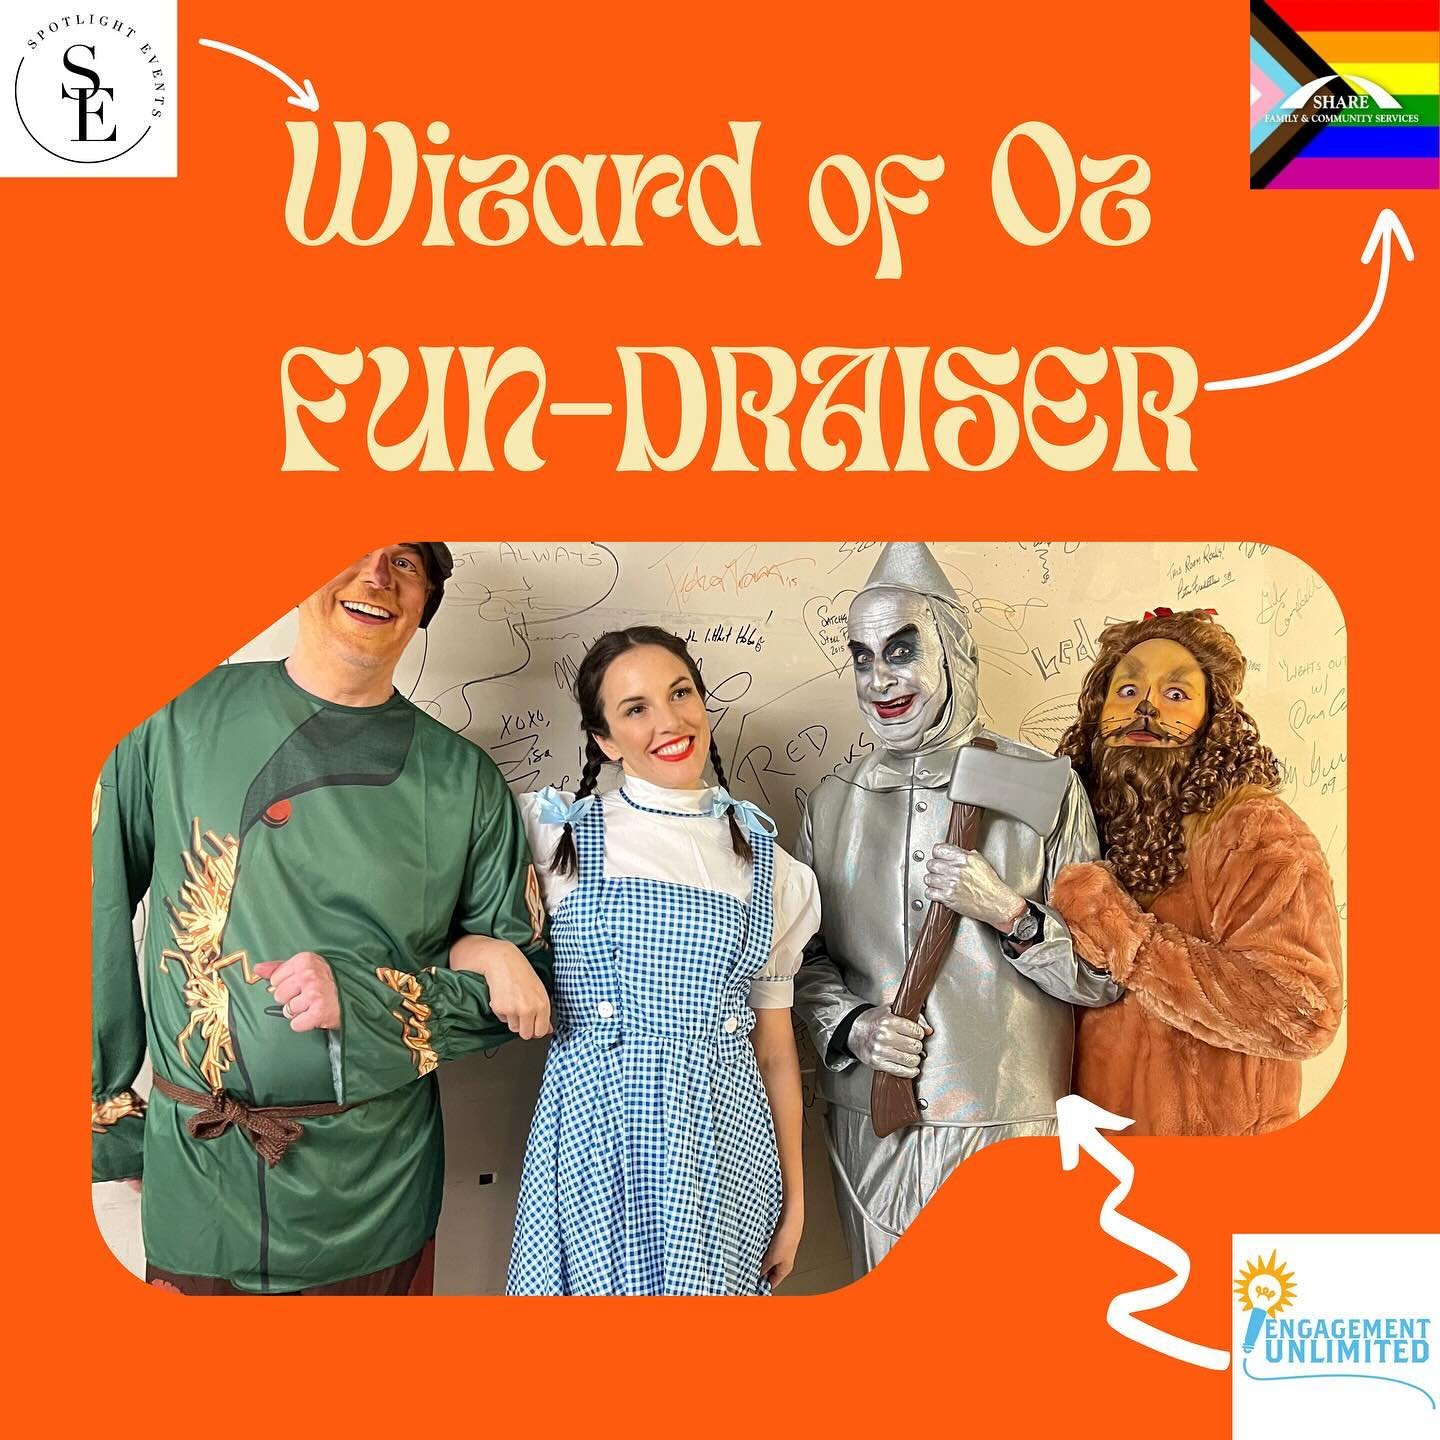 EngagementUnlimited.ca provided character actors for the IMAGINE 2024 Wizard of Oz FUN-draiser for sharesociety.ca created by spotlightevents.ca and helped raise a LOT of $$$